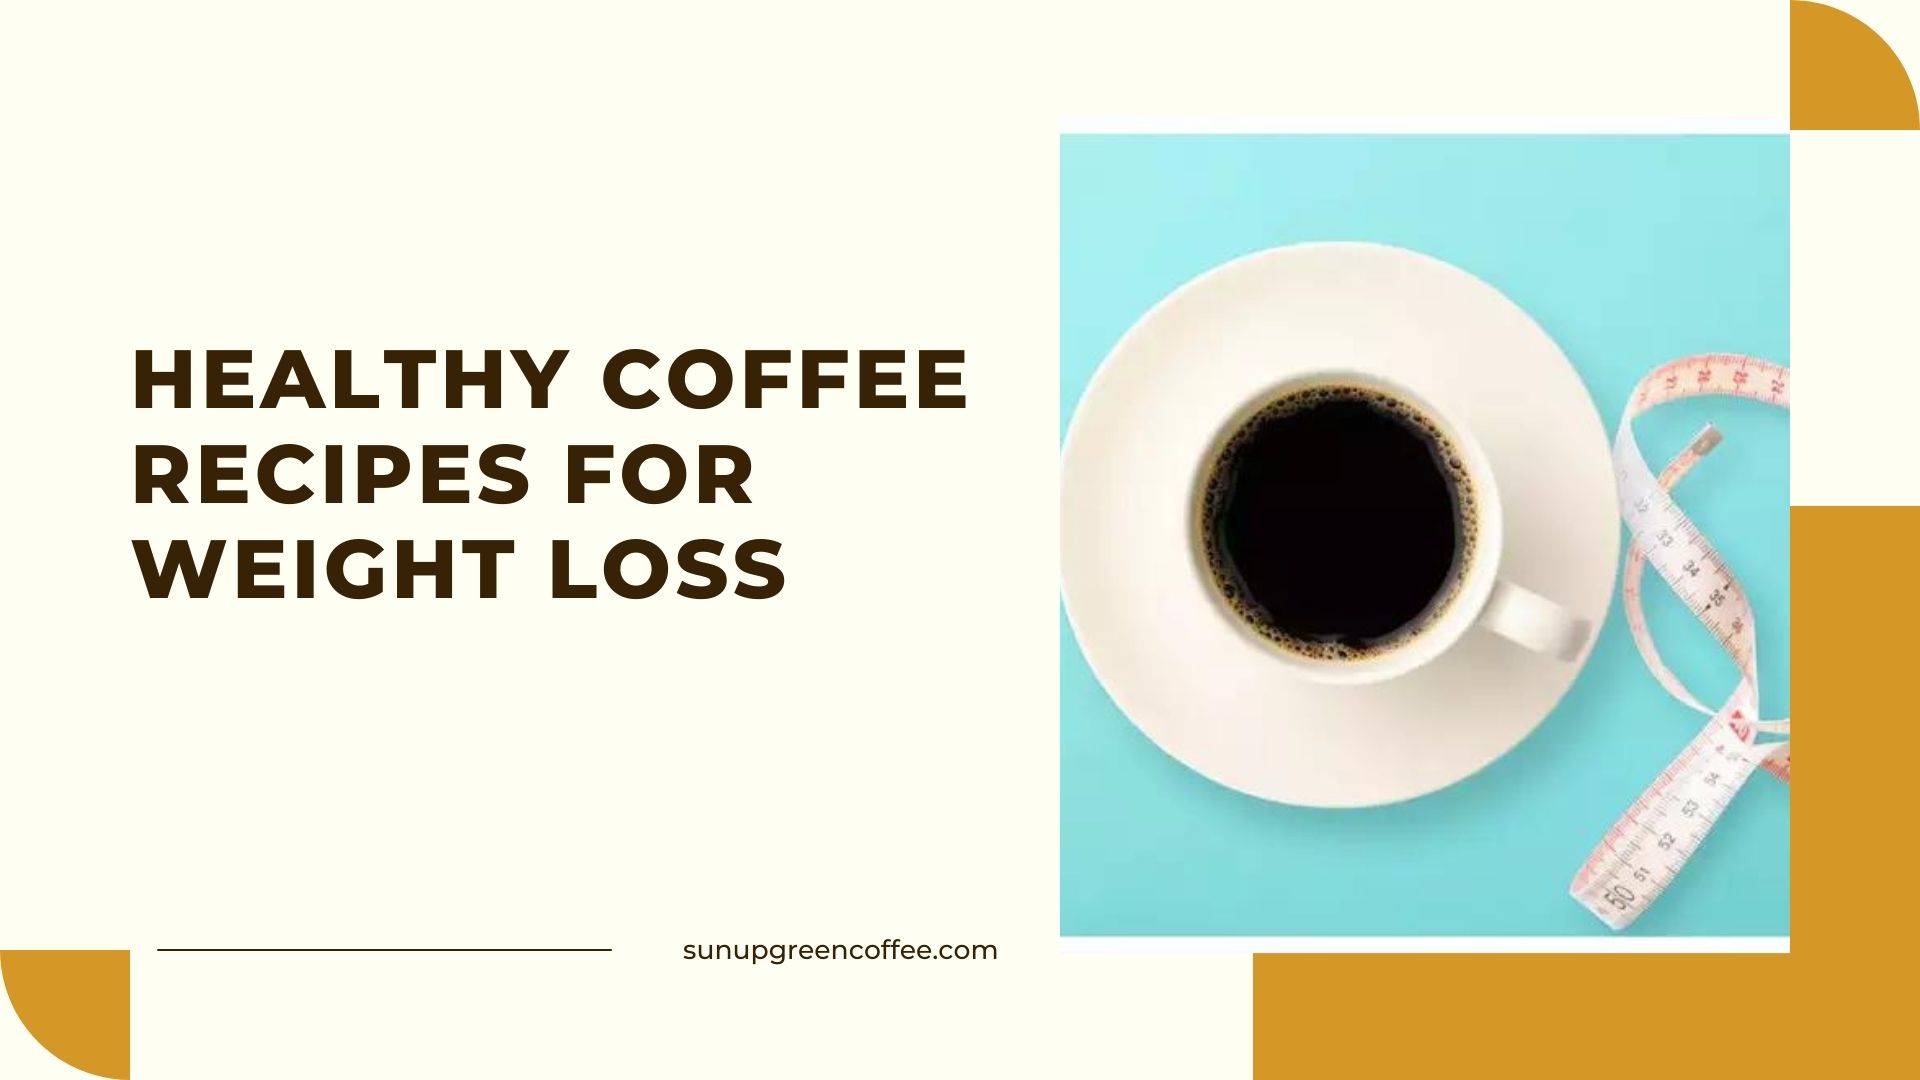 Healthy Coffee Recipes for Weight Loss